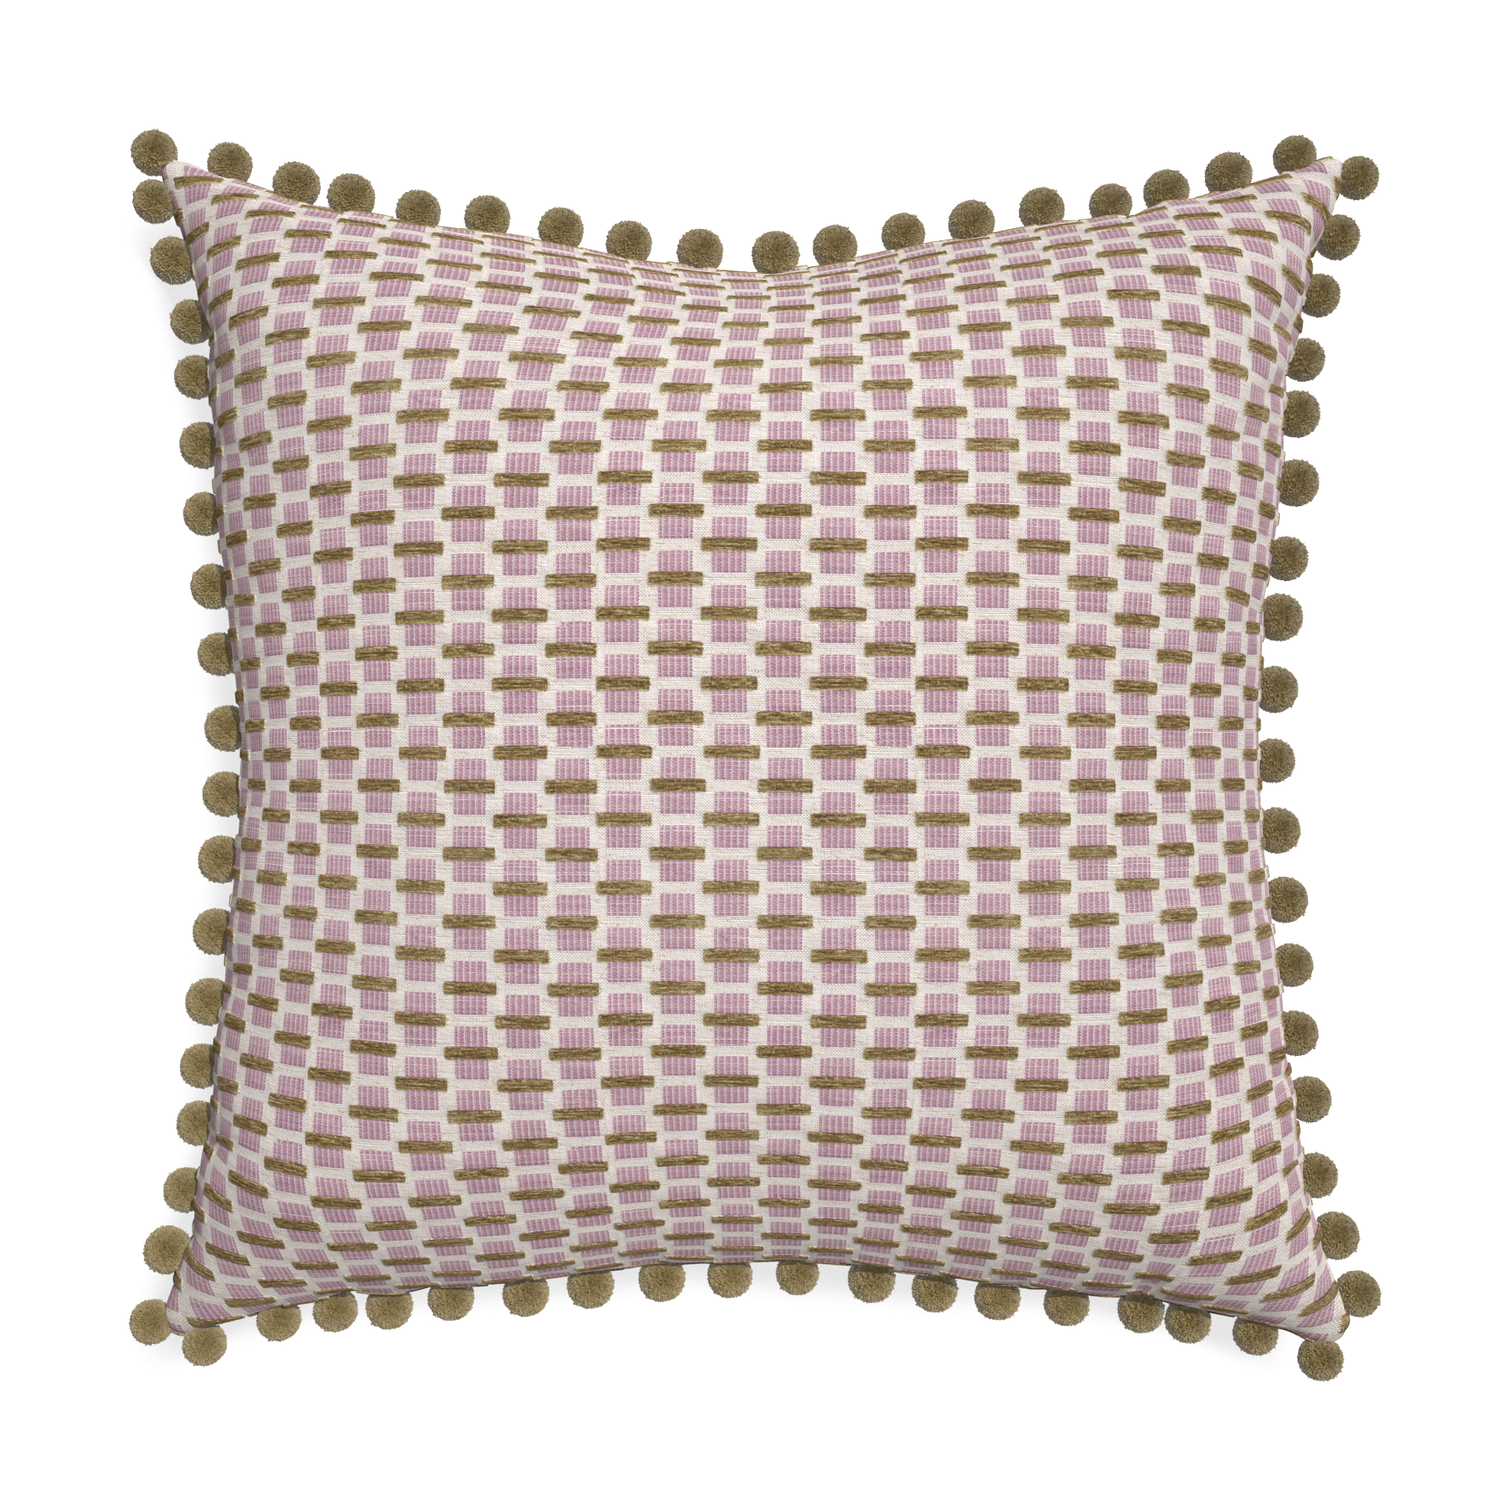 Euro-sham willow orchid custom pink geometric chenillepillow with olive pom pom on white background